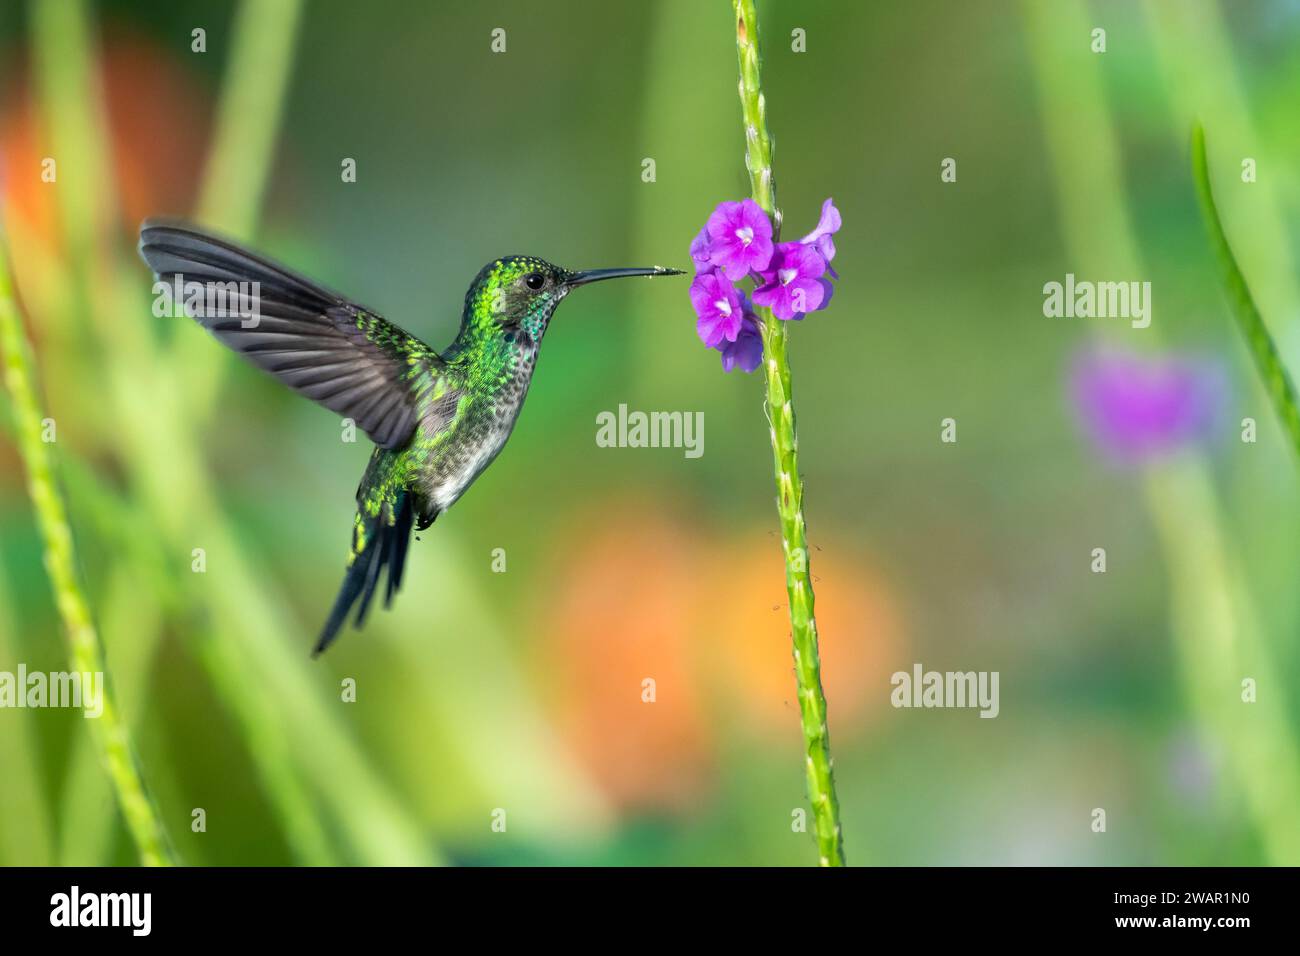 Blue-chinned Sapphire hummingbird, chlorestes notata, with tail feathers spread feeding on flowers in a garden Stock Photo